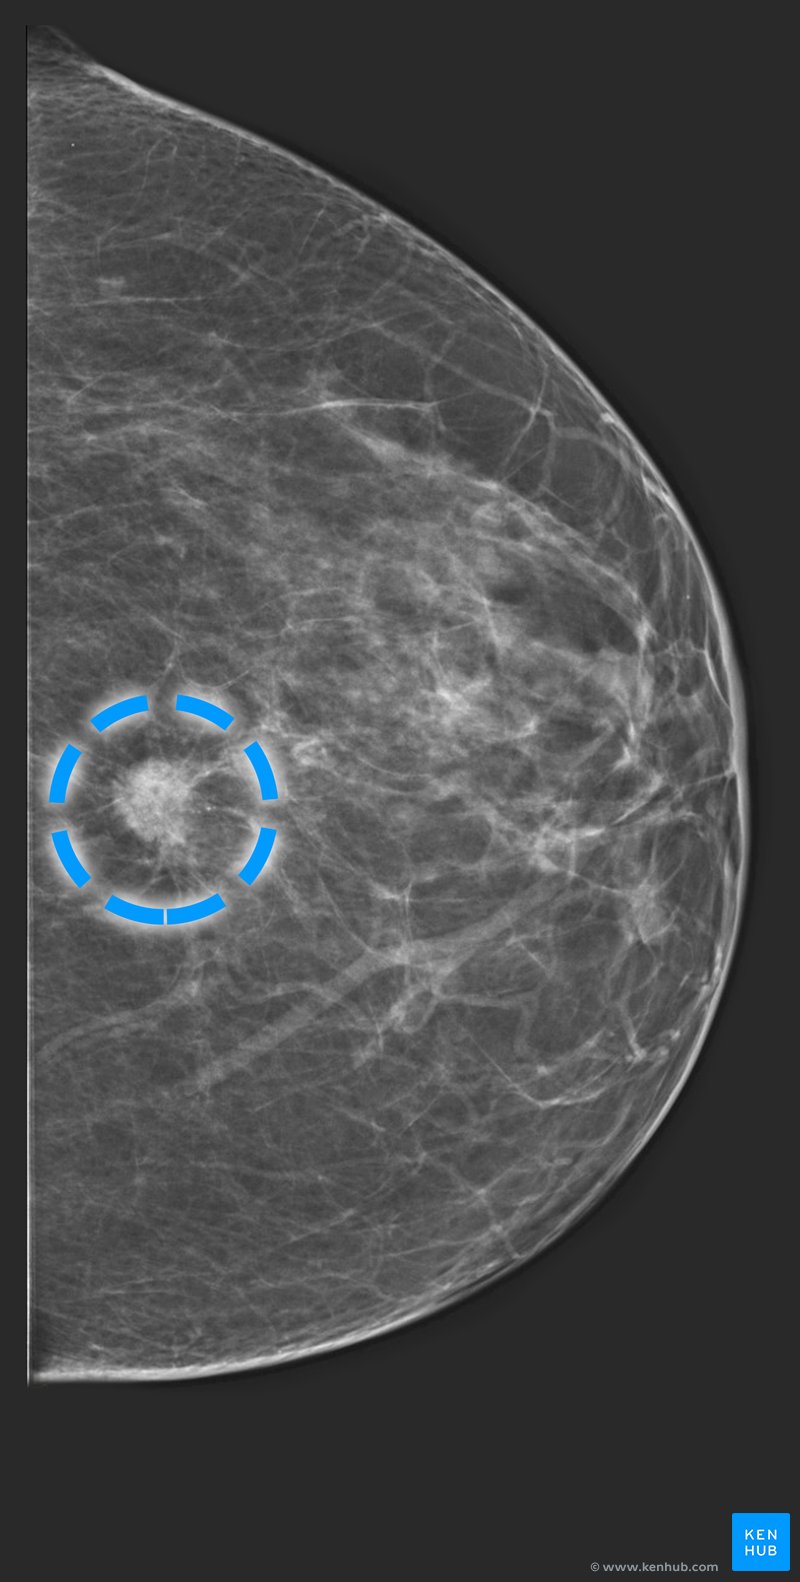 Invasive Ductal Carcinoma - Mammography